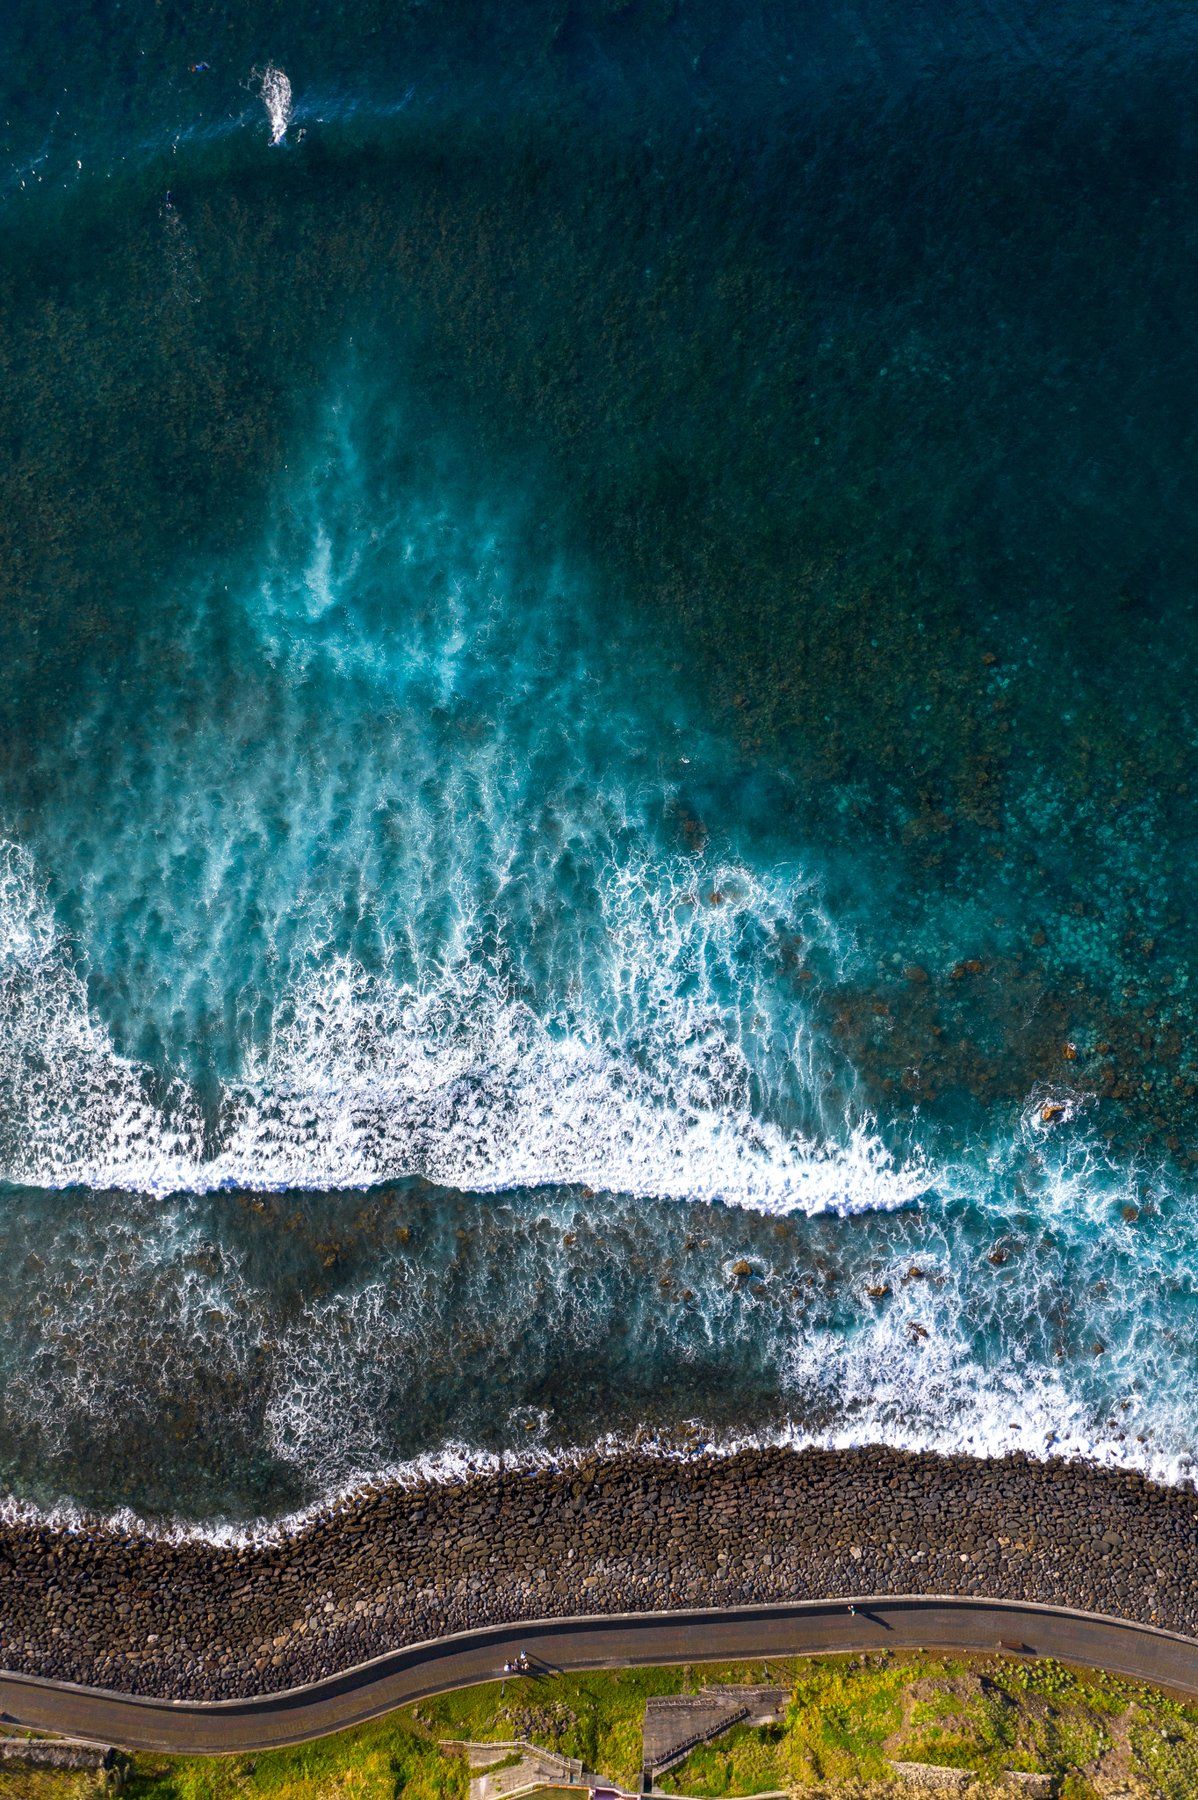 madeira ,portugal ,saovicente ,lsurfing ,island ,atlanticocean ,surfers ,aerial ,dronephotography ,vertical ,reef ,nature ,sport ,action ,exploremadeira ,travel ,waves ,breakingpoint ,planet ,underwater ,volcanic ,catchingwaves ,spring ,weather ,volcanici, Marko Radovanovic